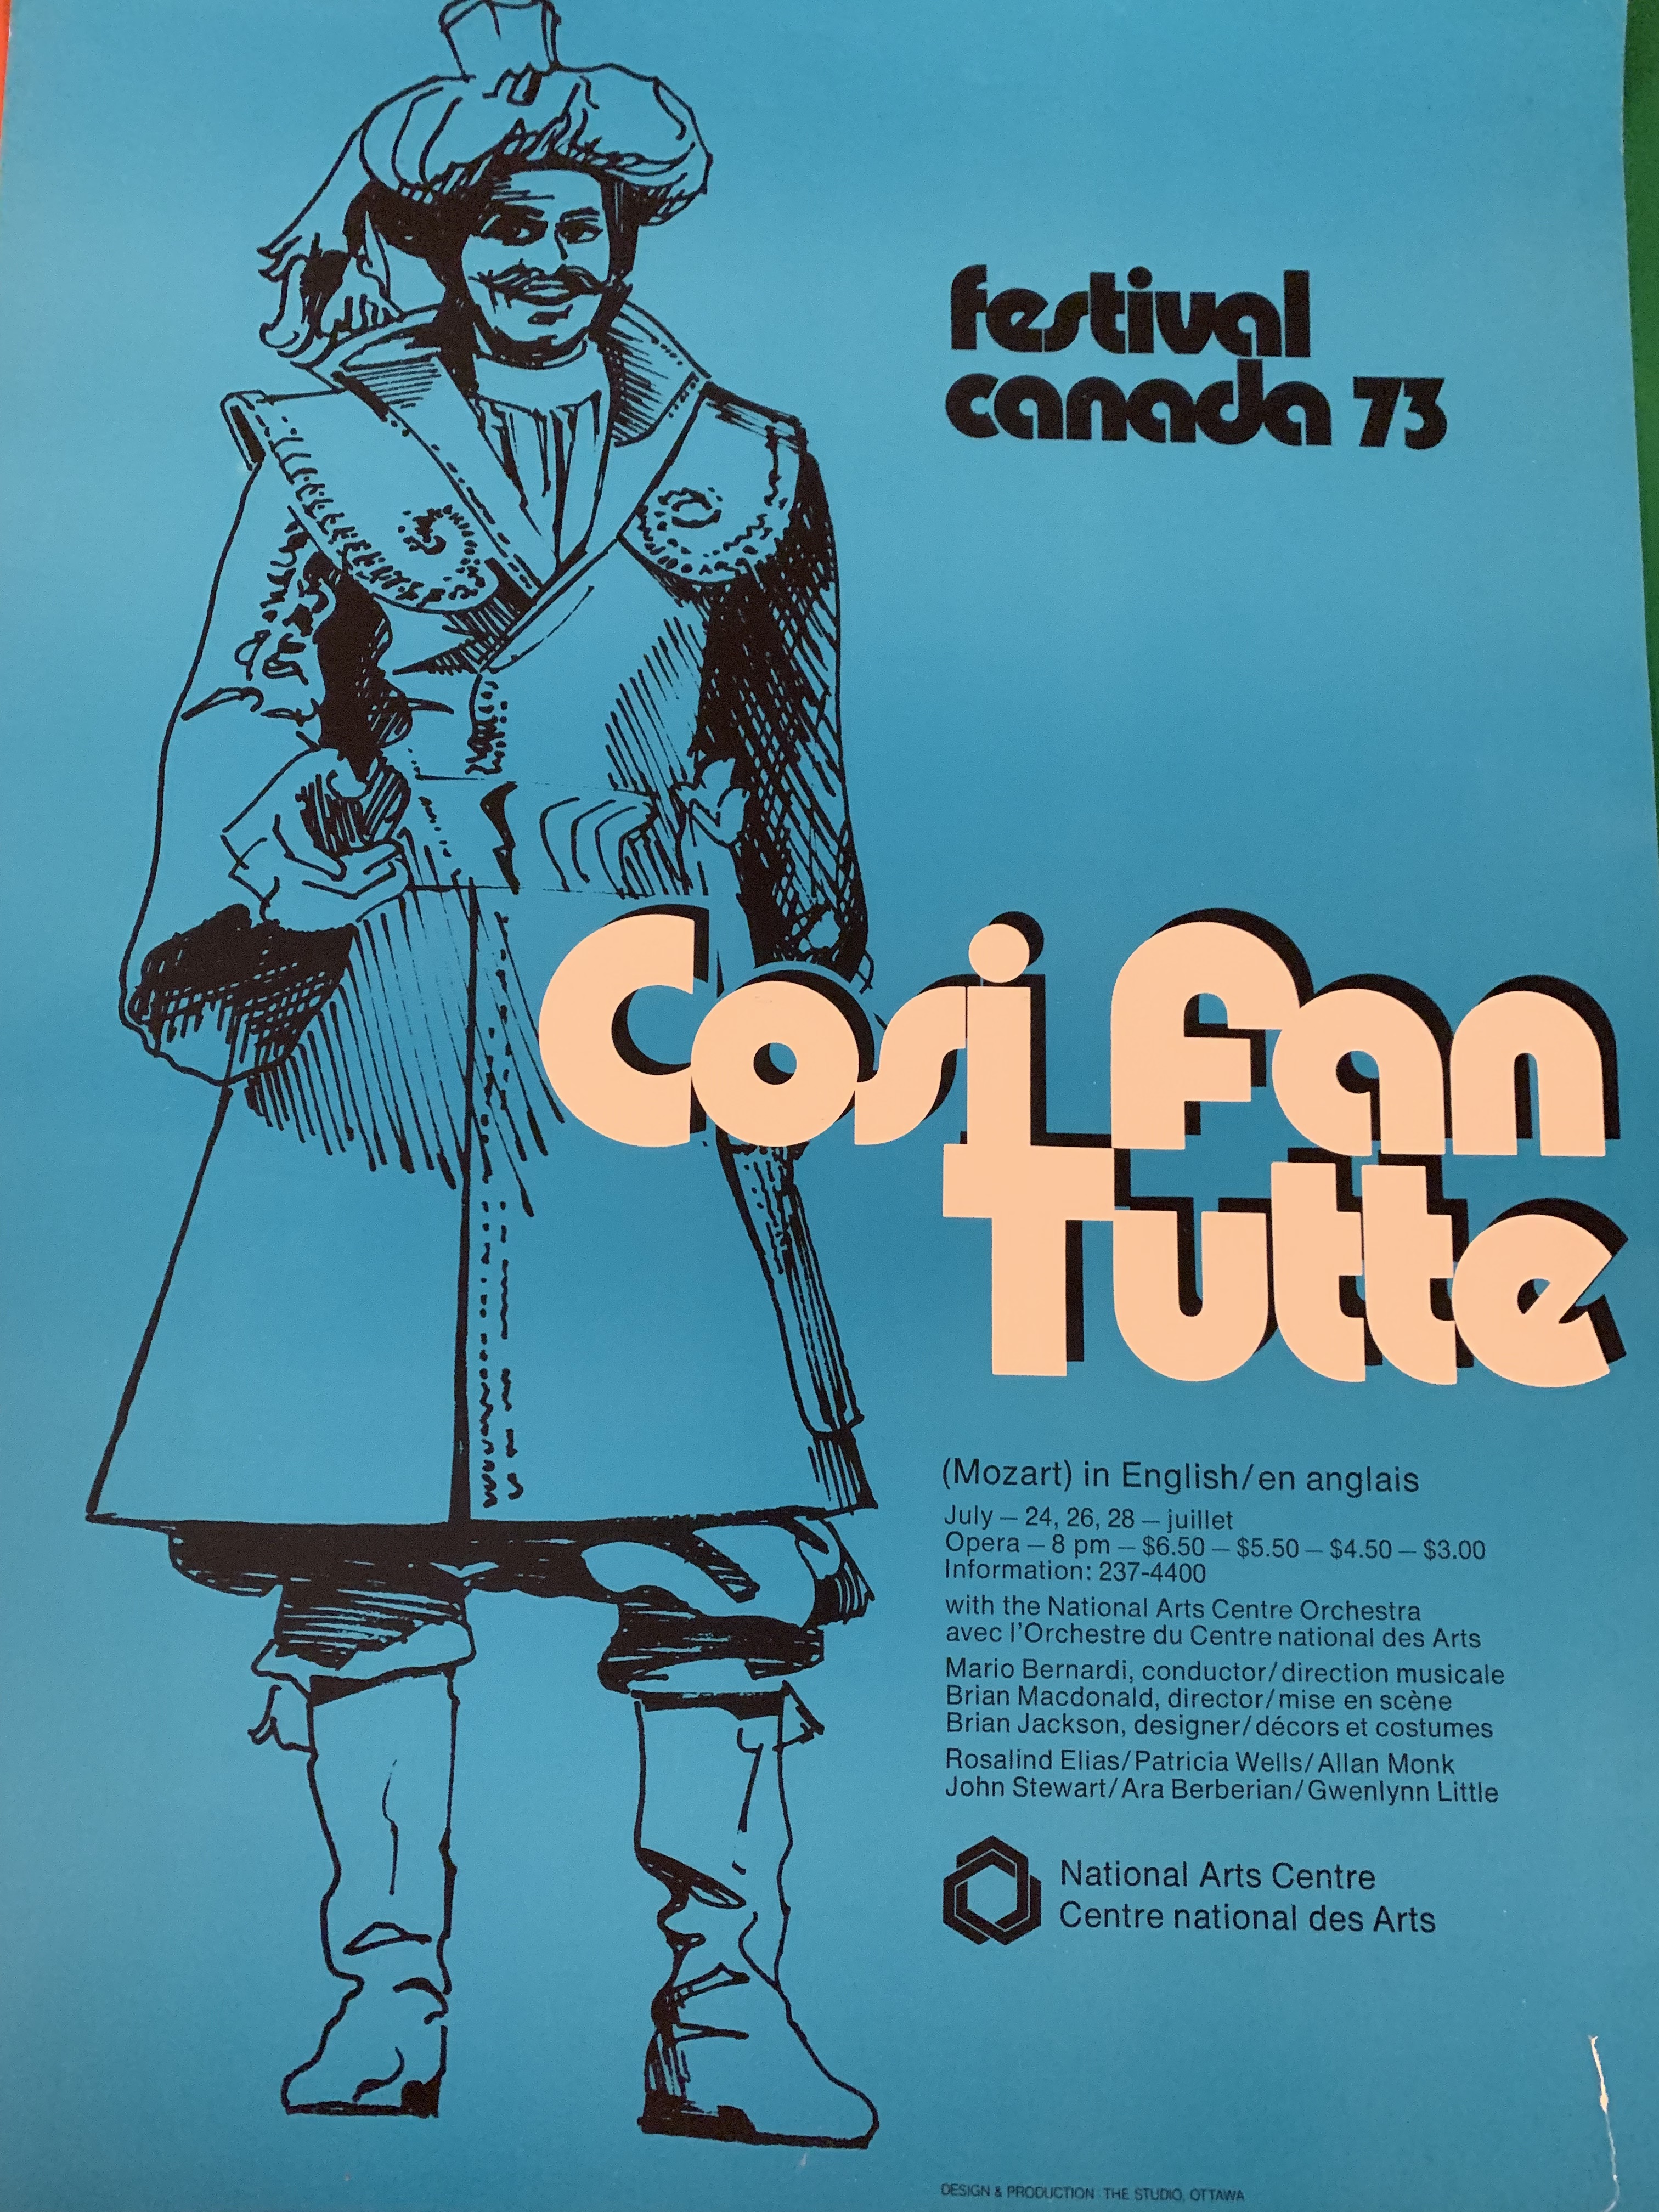 Poster: W. A. Mozart's "Cosi tutte" for Festival Canada, 1973 Linking Culture(s)